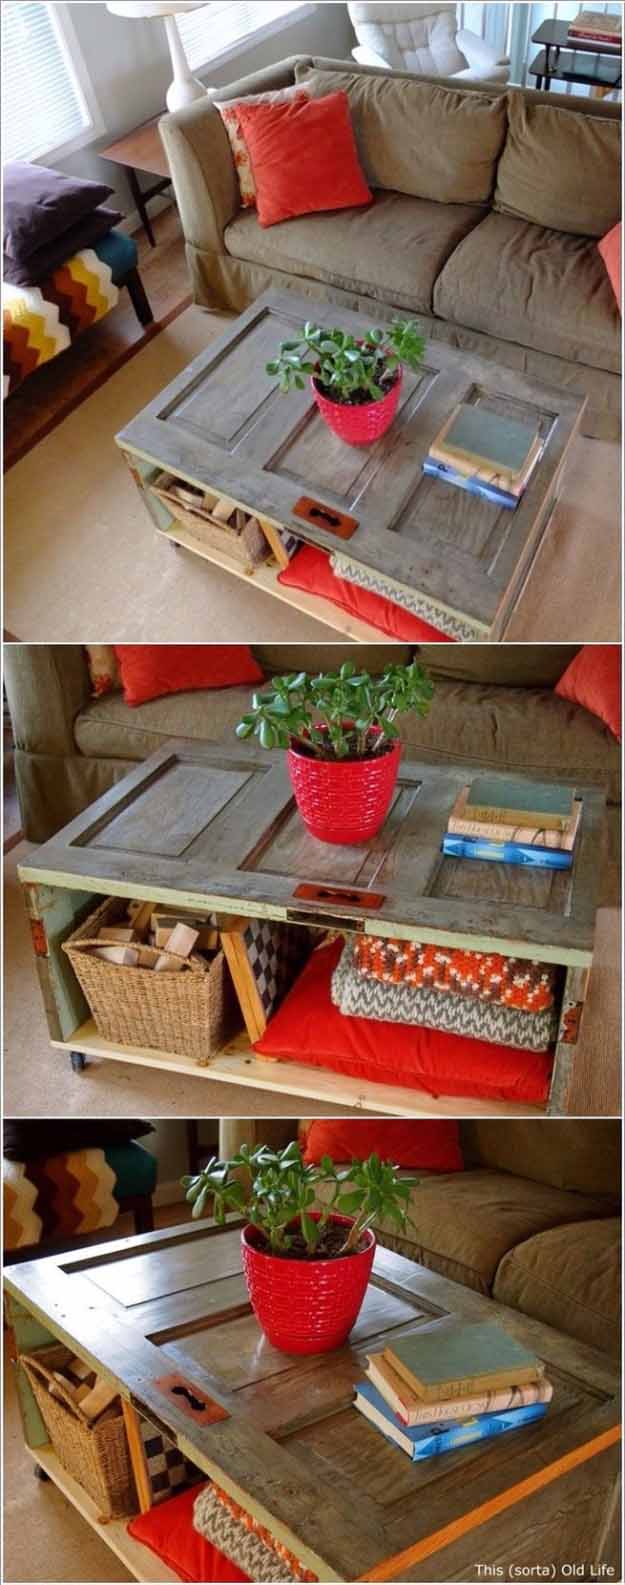 DIY Repurposed Furniture Projects | Easy Upcycling Ideas for the Home | DIY Coffee Table with Storage | DIY Projects and Crafts by DIY JOY  at http://diyjoy.com/diy-home-decor-coffee-table-ideas